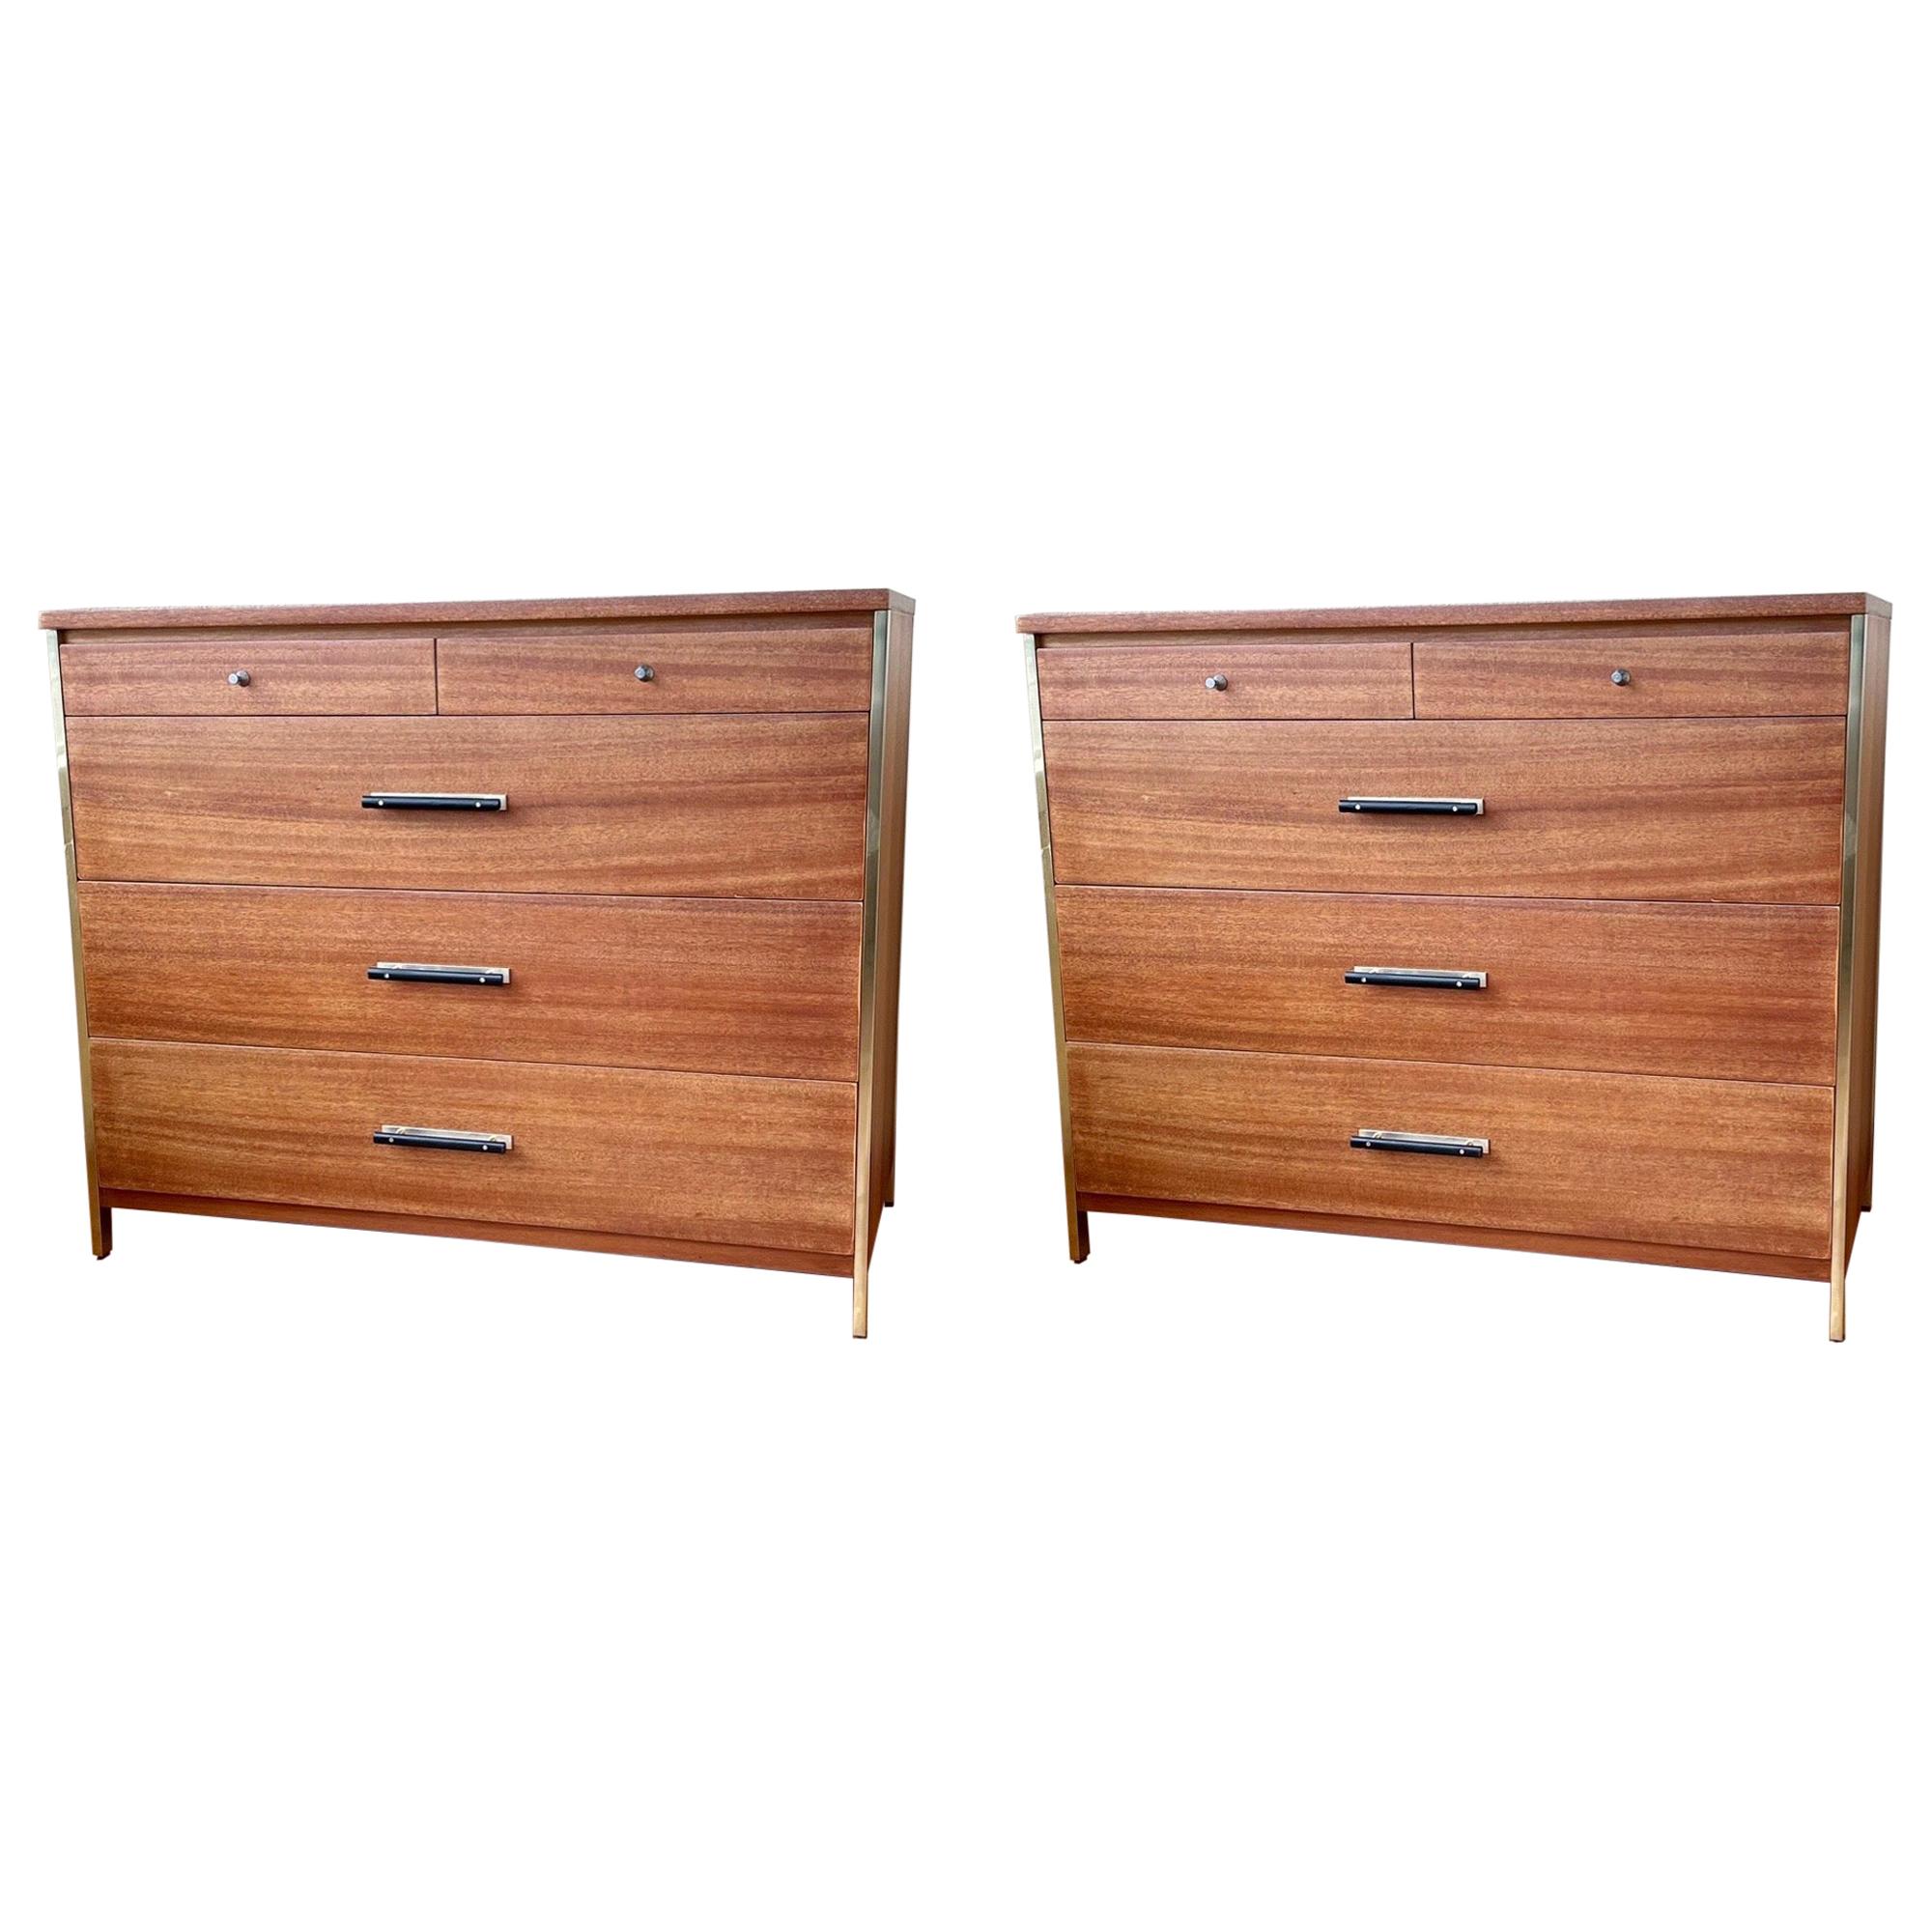 American Midcentury Pair of Dressers Designed by Paul McCobb for Calvin Group